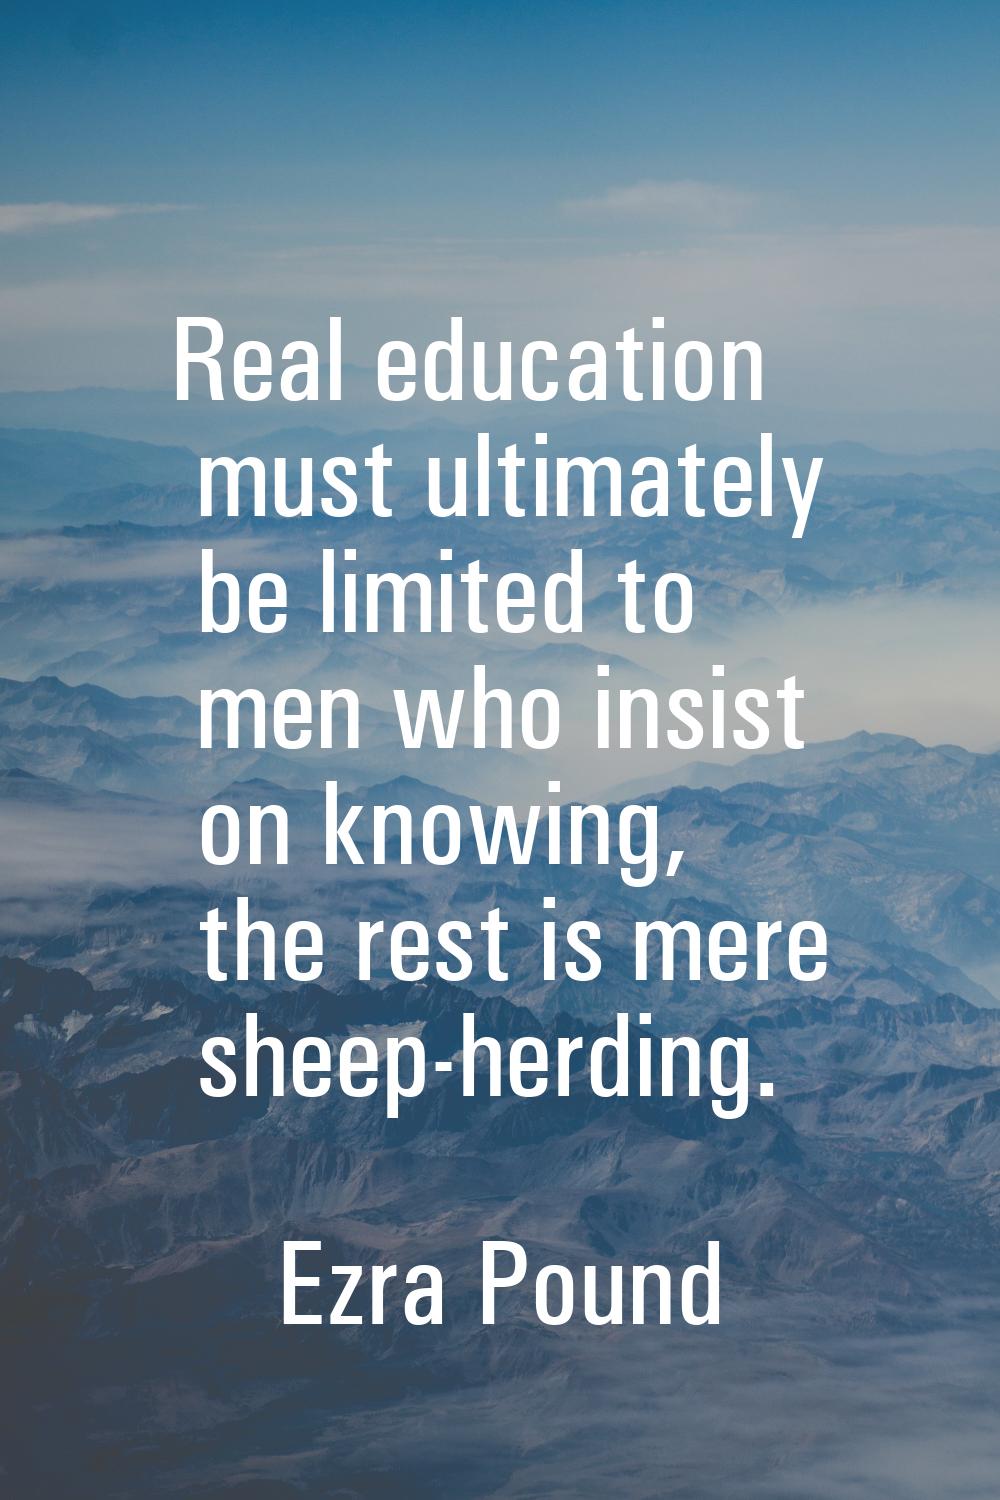 Real education must ultimately be limited to men who insist on knowing, the rest is mere sheep-herd